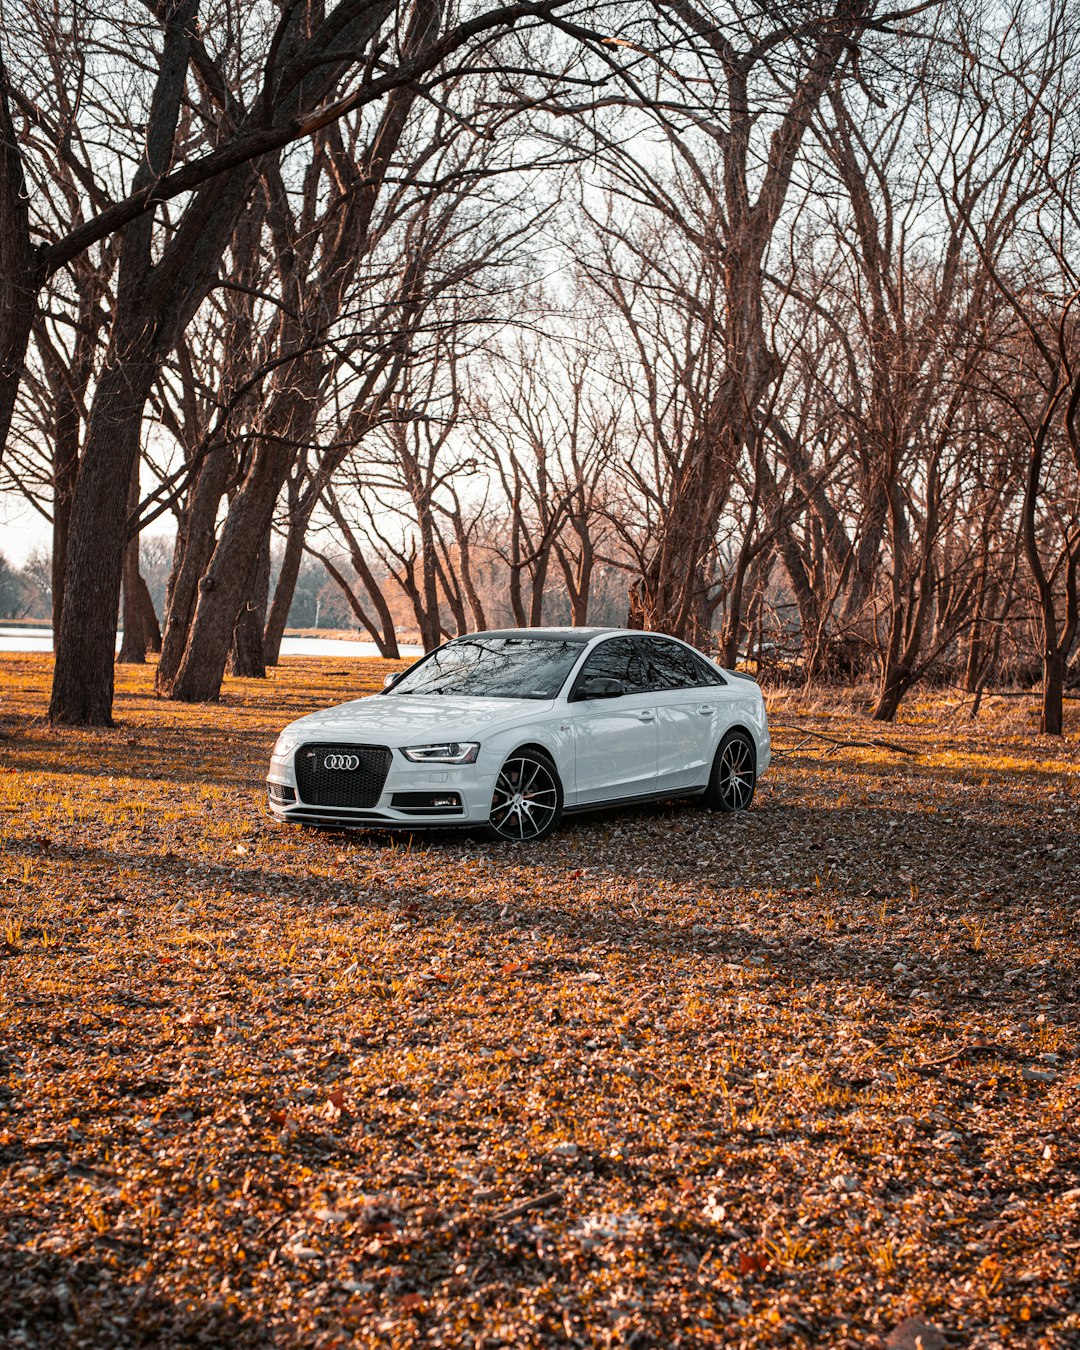 white bmw m 3 coupe parked on brown dried leaves during daytime